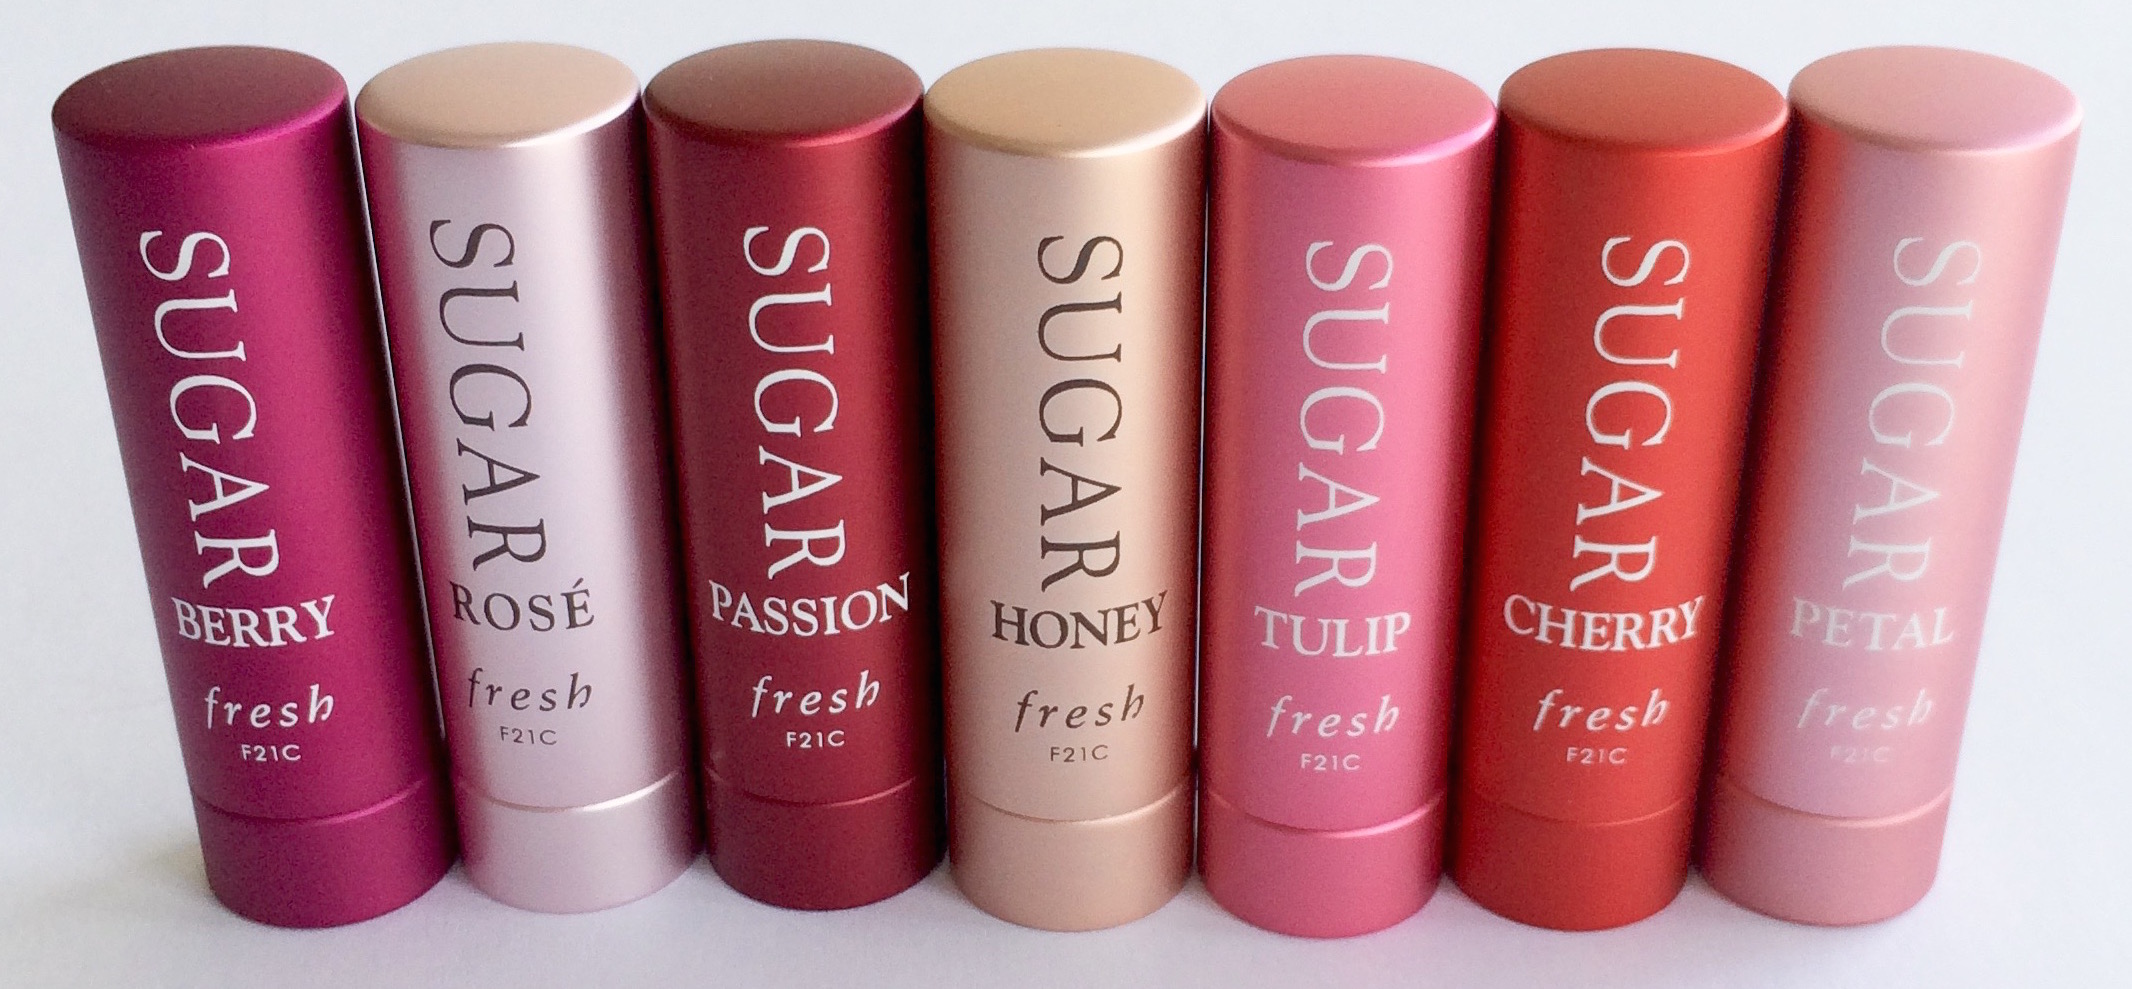 REVIEW: Fresh's Sugar Lip Treatments, One Caveat You Should Know